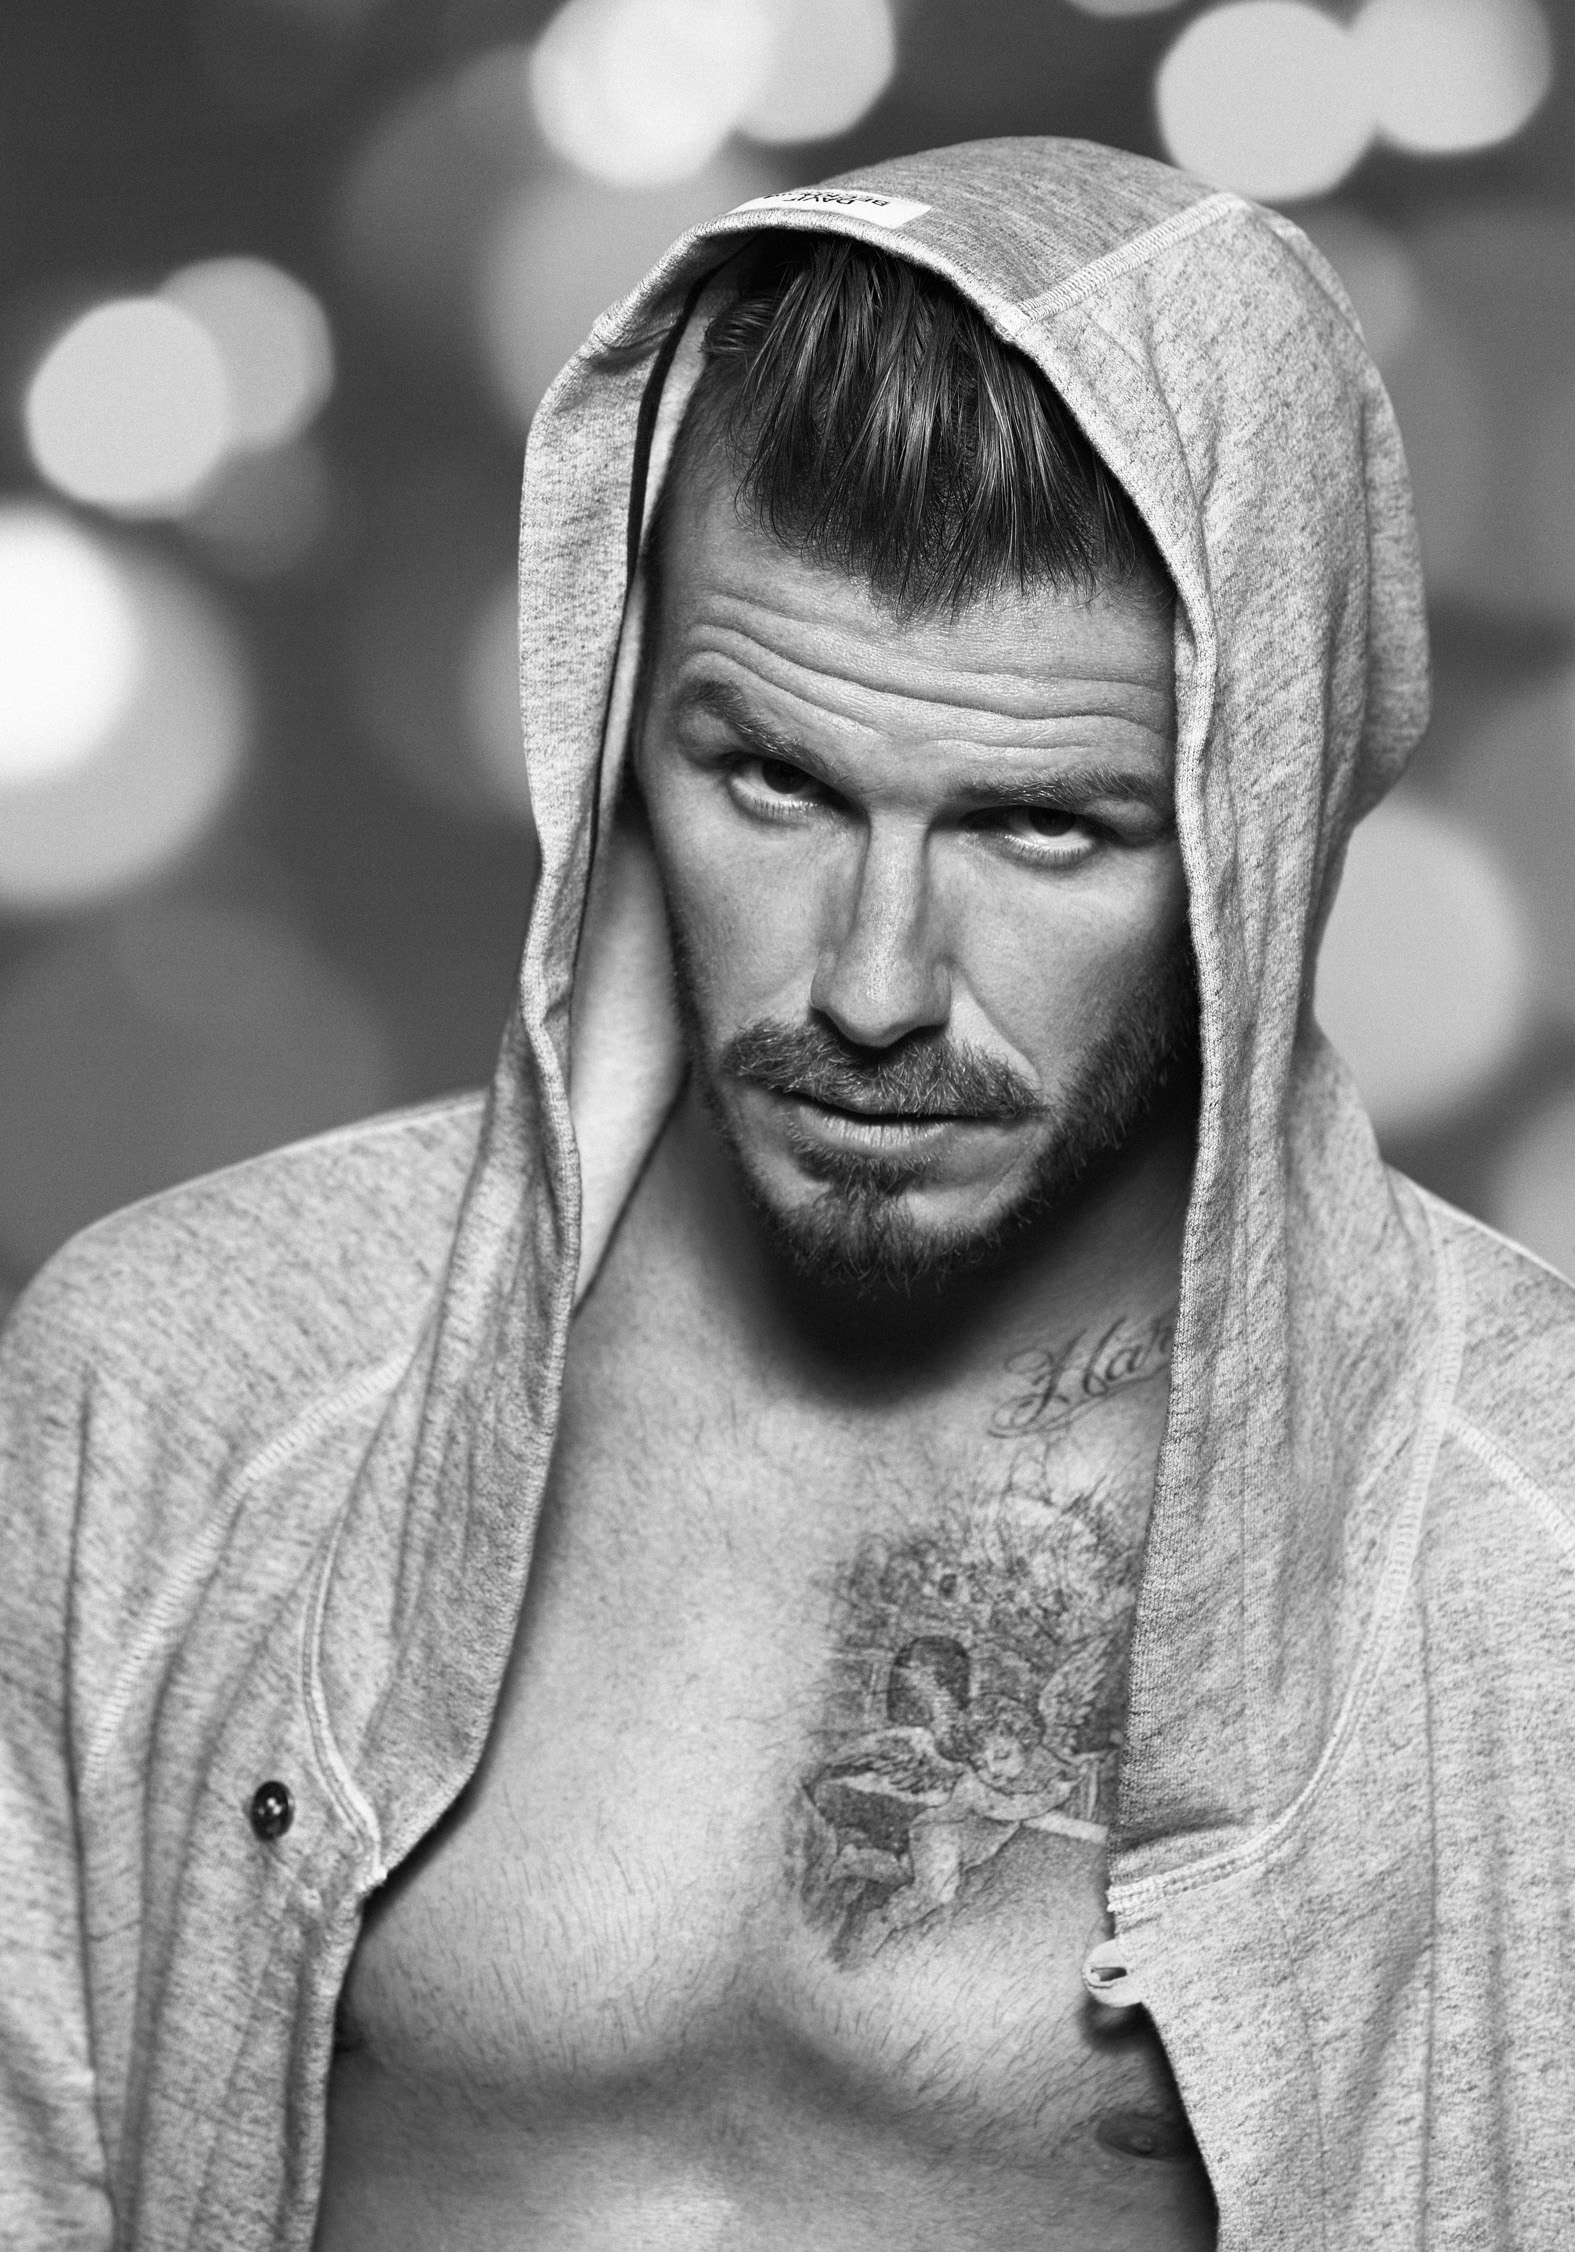 David Beckham Celebrates The Holidays With A New Handm Campaign For His